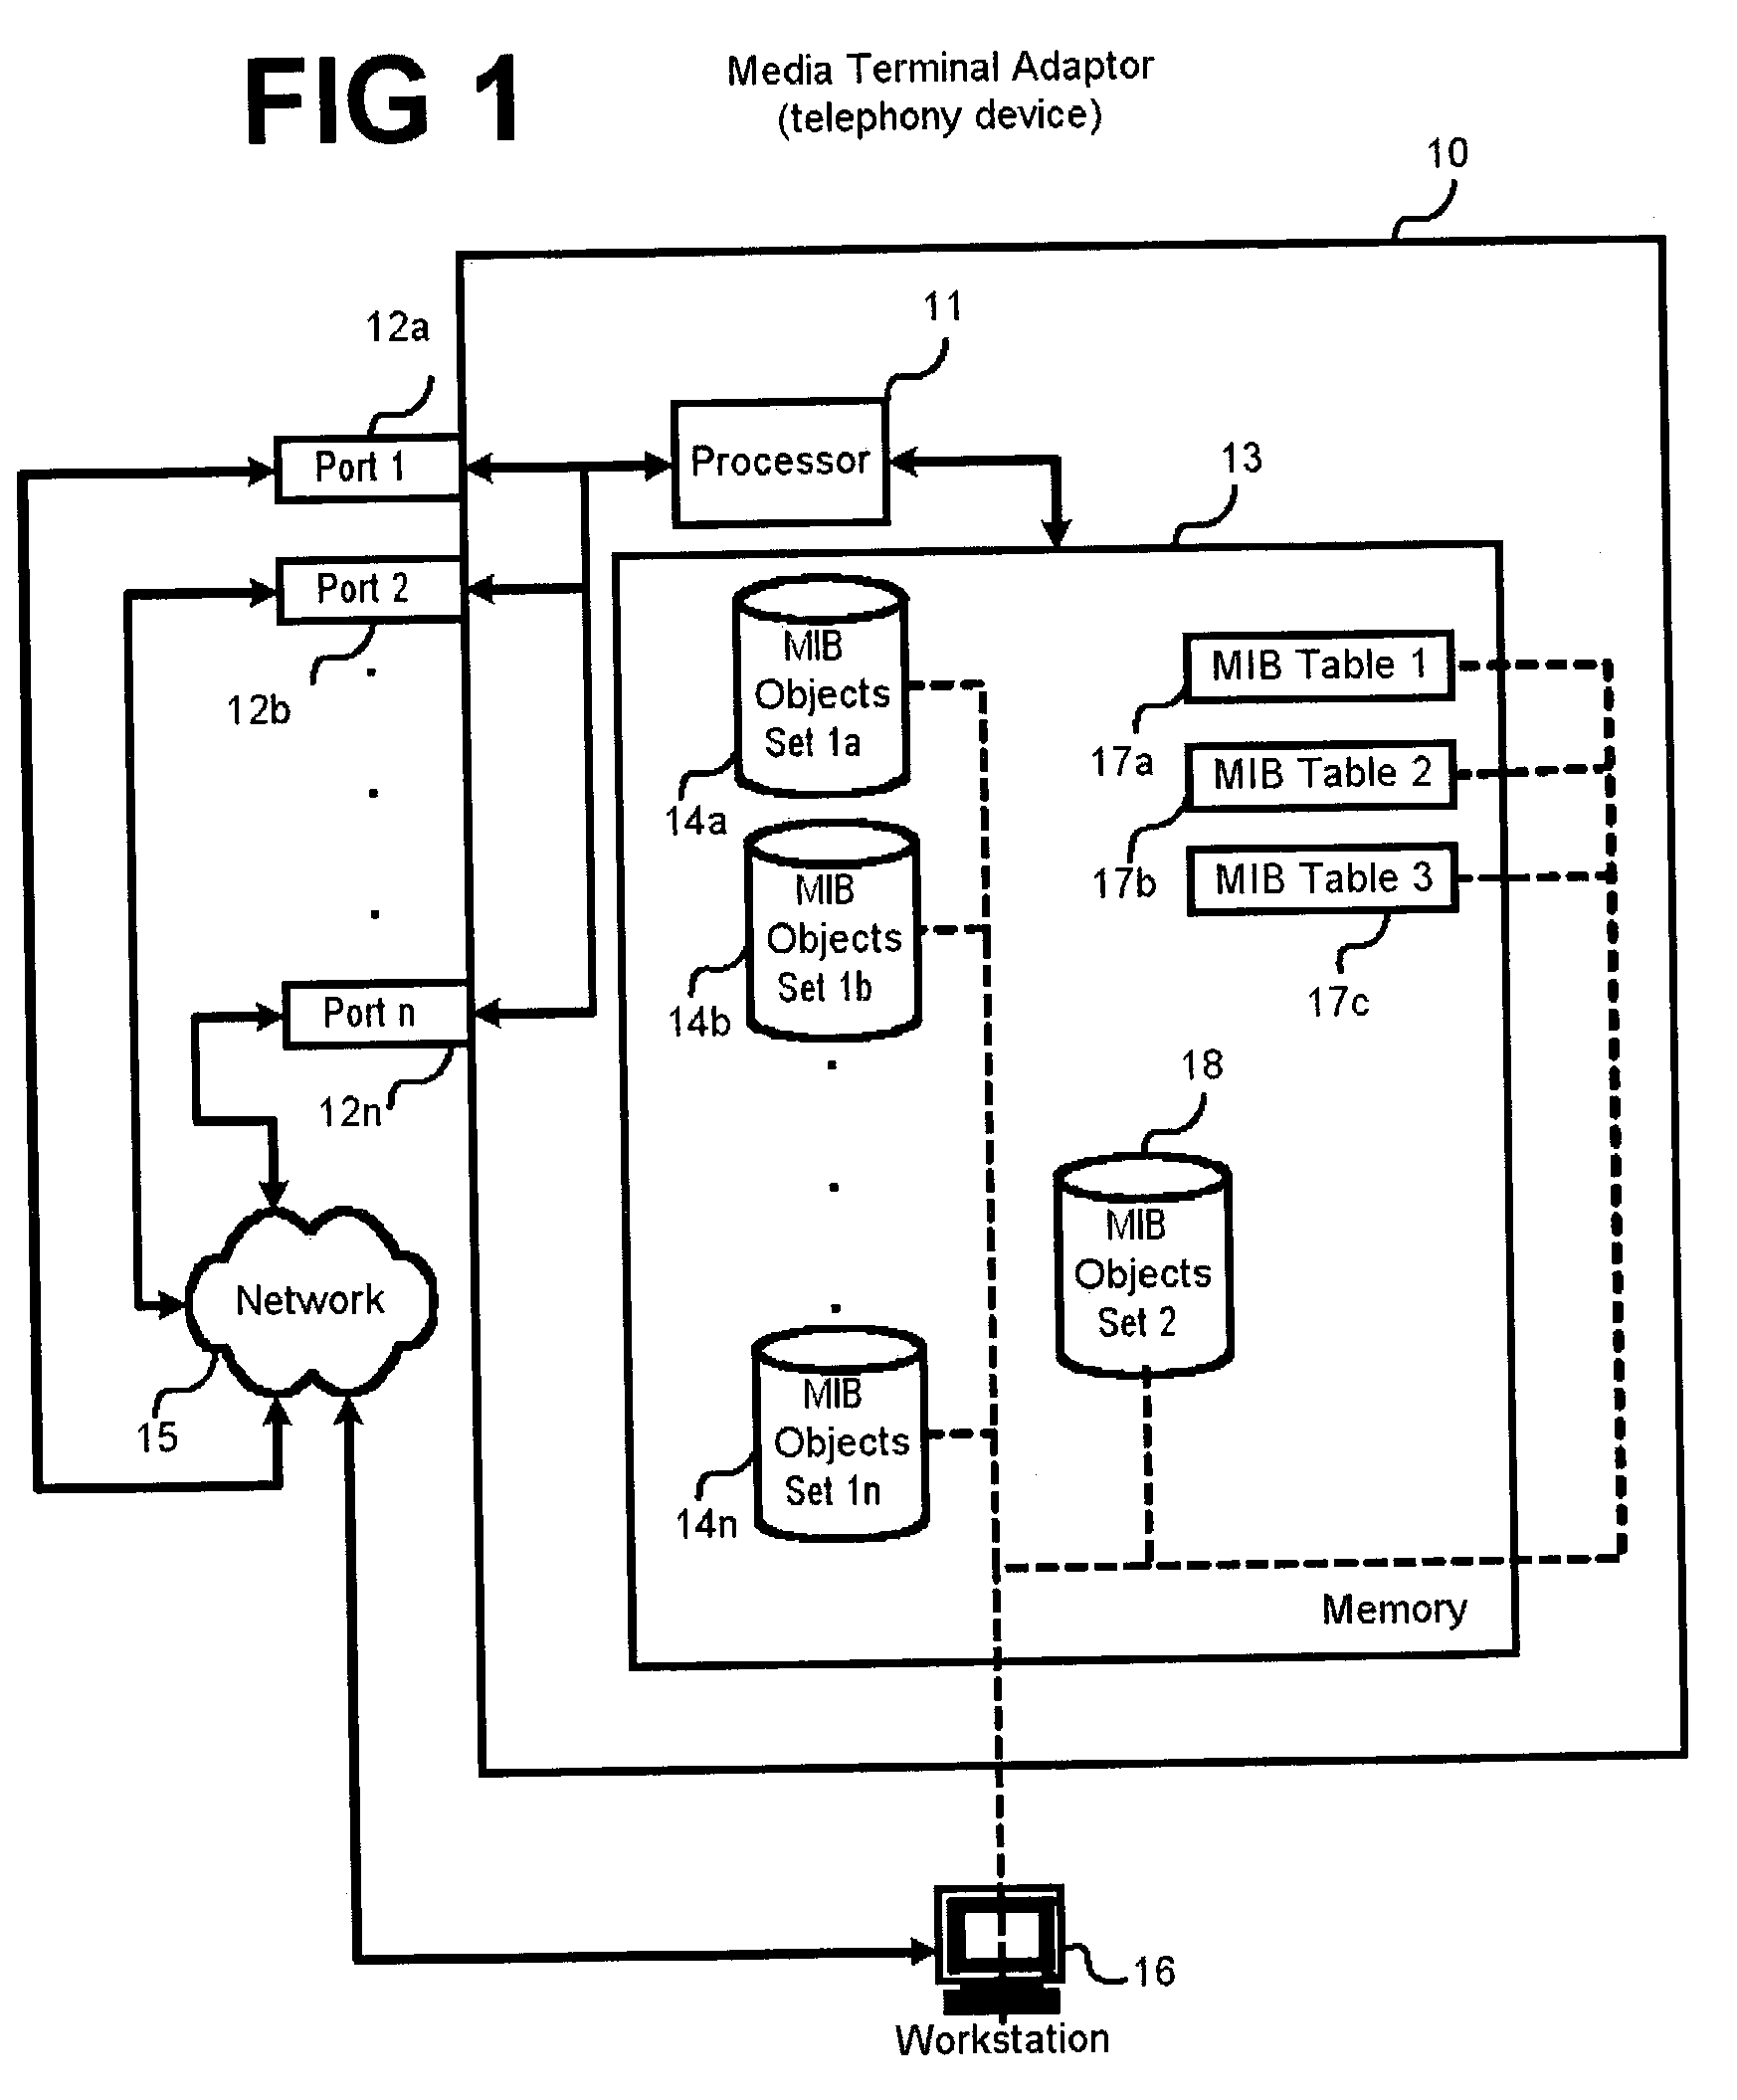 Method for generalization of telephone signaling requirements to support multiple international marketplaces in a single customer premises device